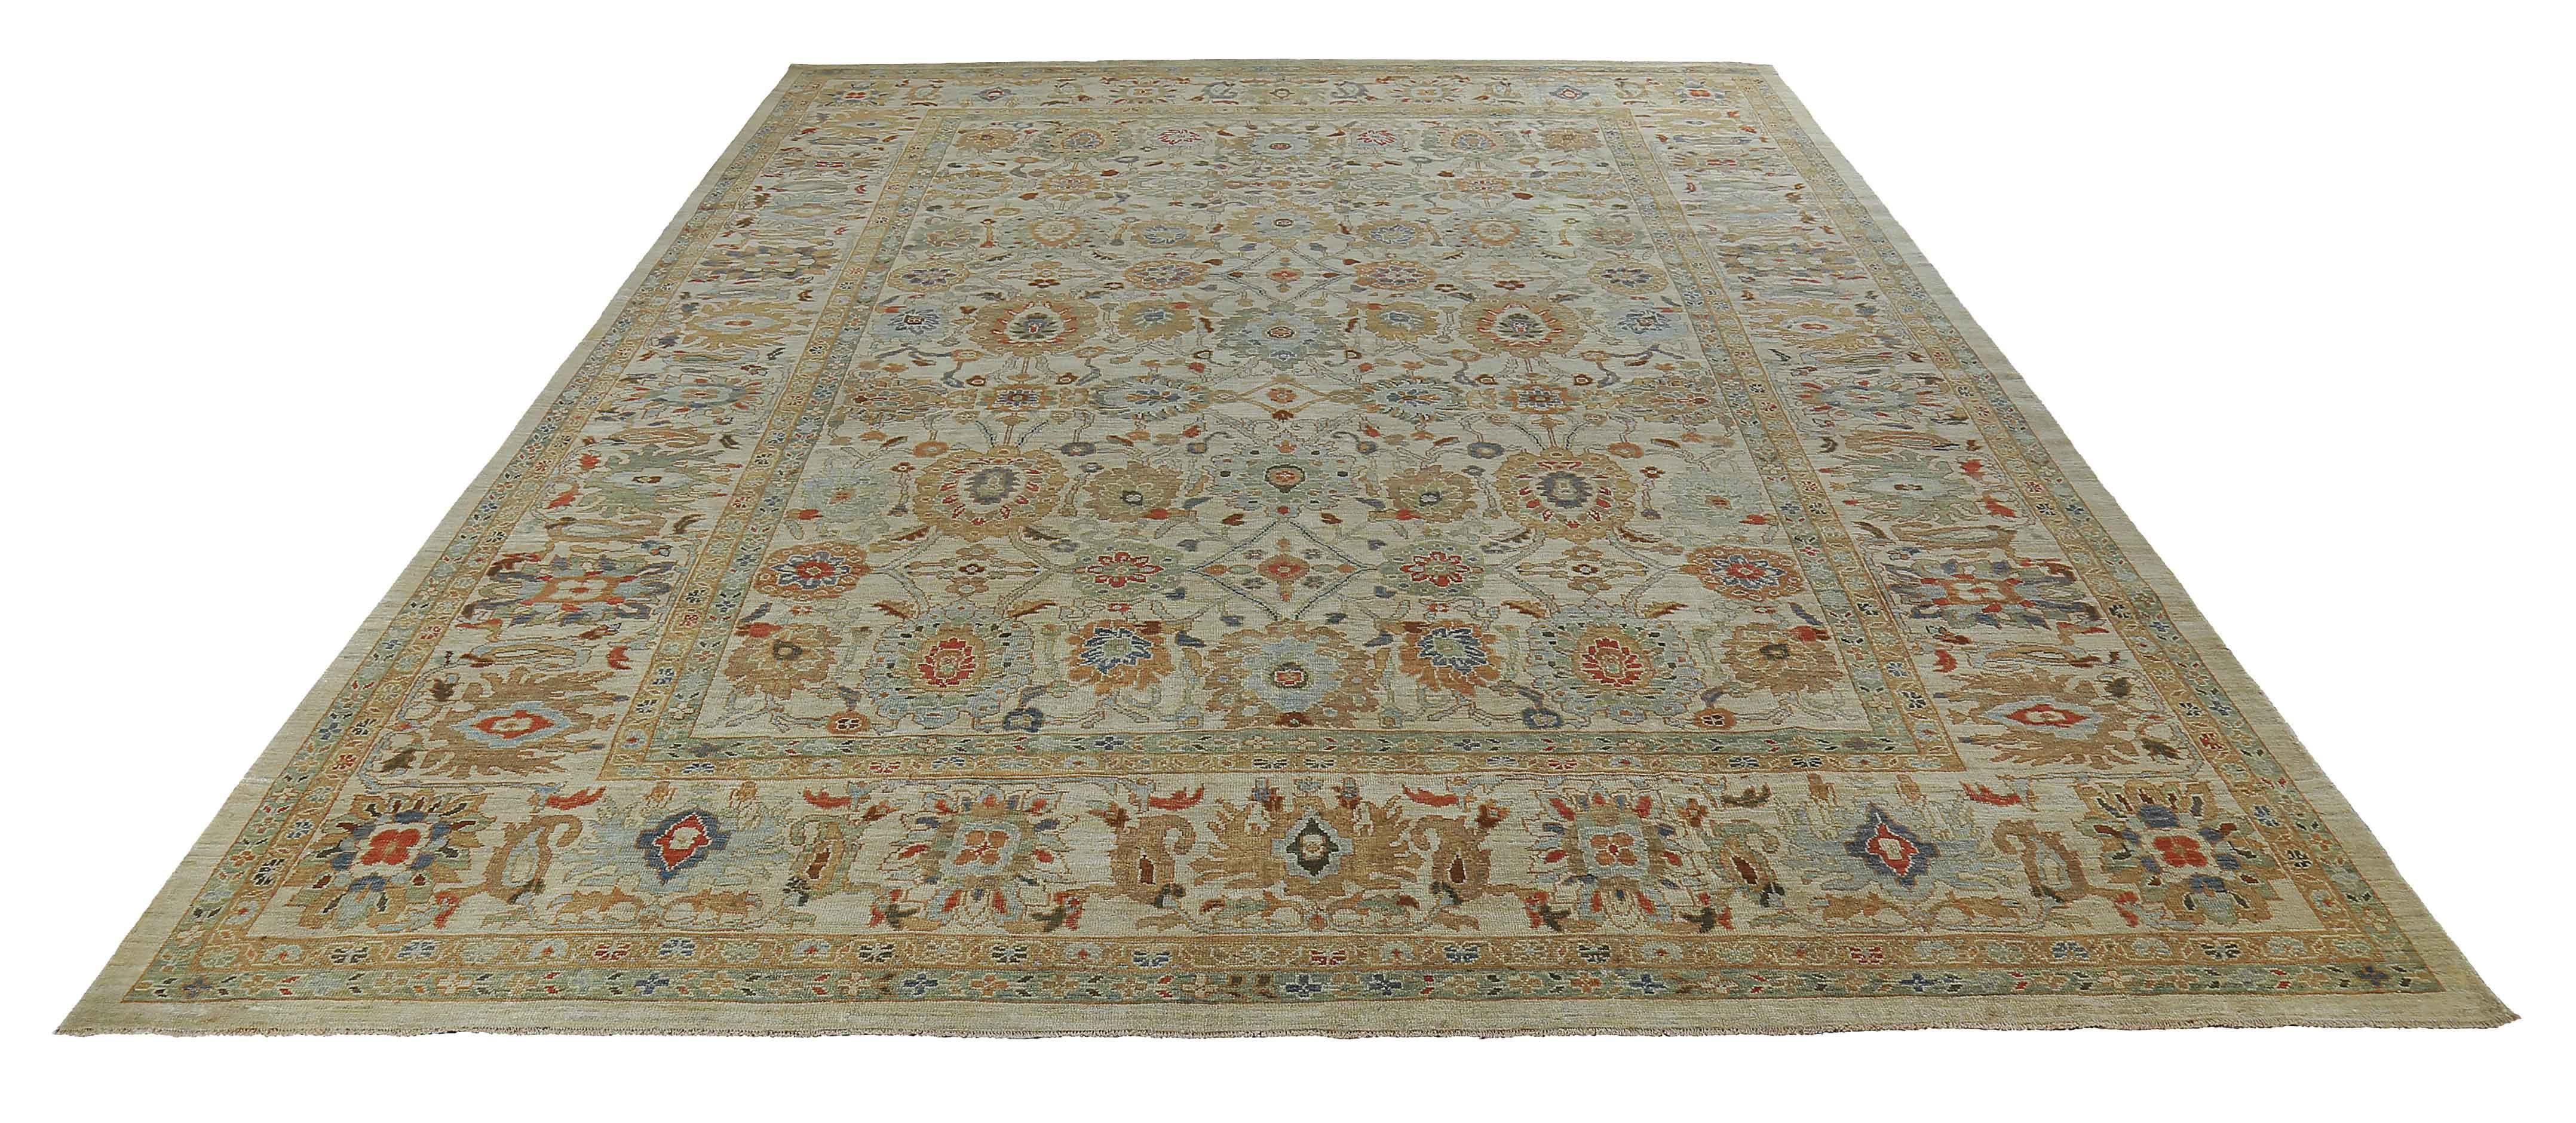 New handmade Turkish area rug from high quality sheep’s wool and colored with eco-friendly vegetable dyes that are proven safe for humans and pets alike. It’s a classic Sultanabad design showcasing a lovely ivory field with prominent Herati flower